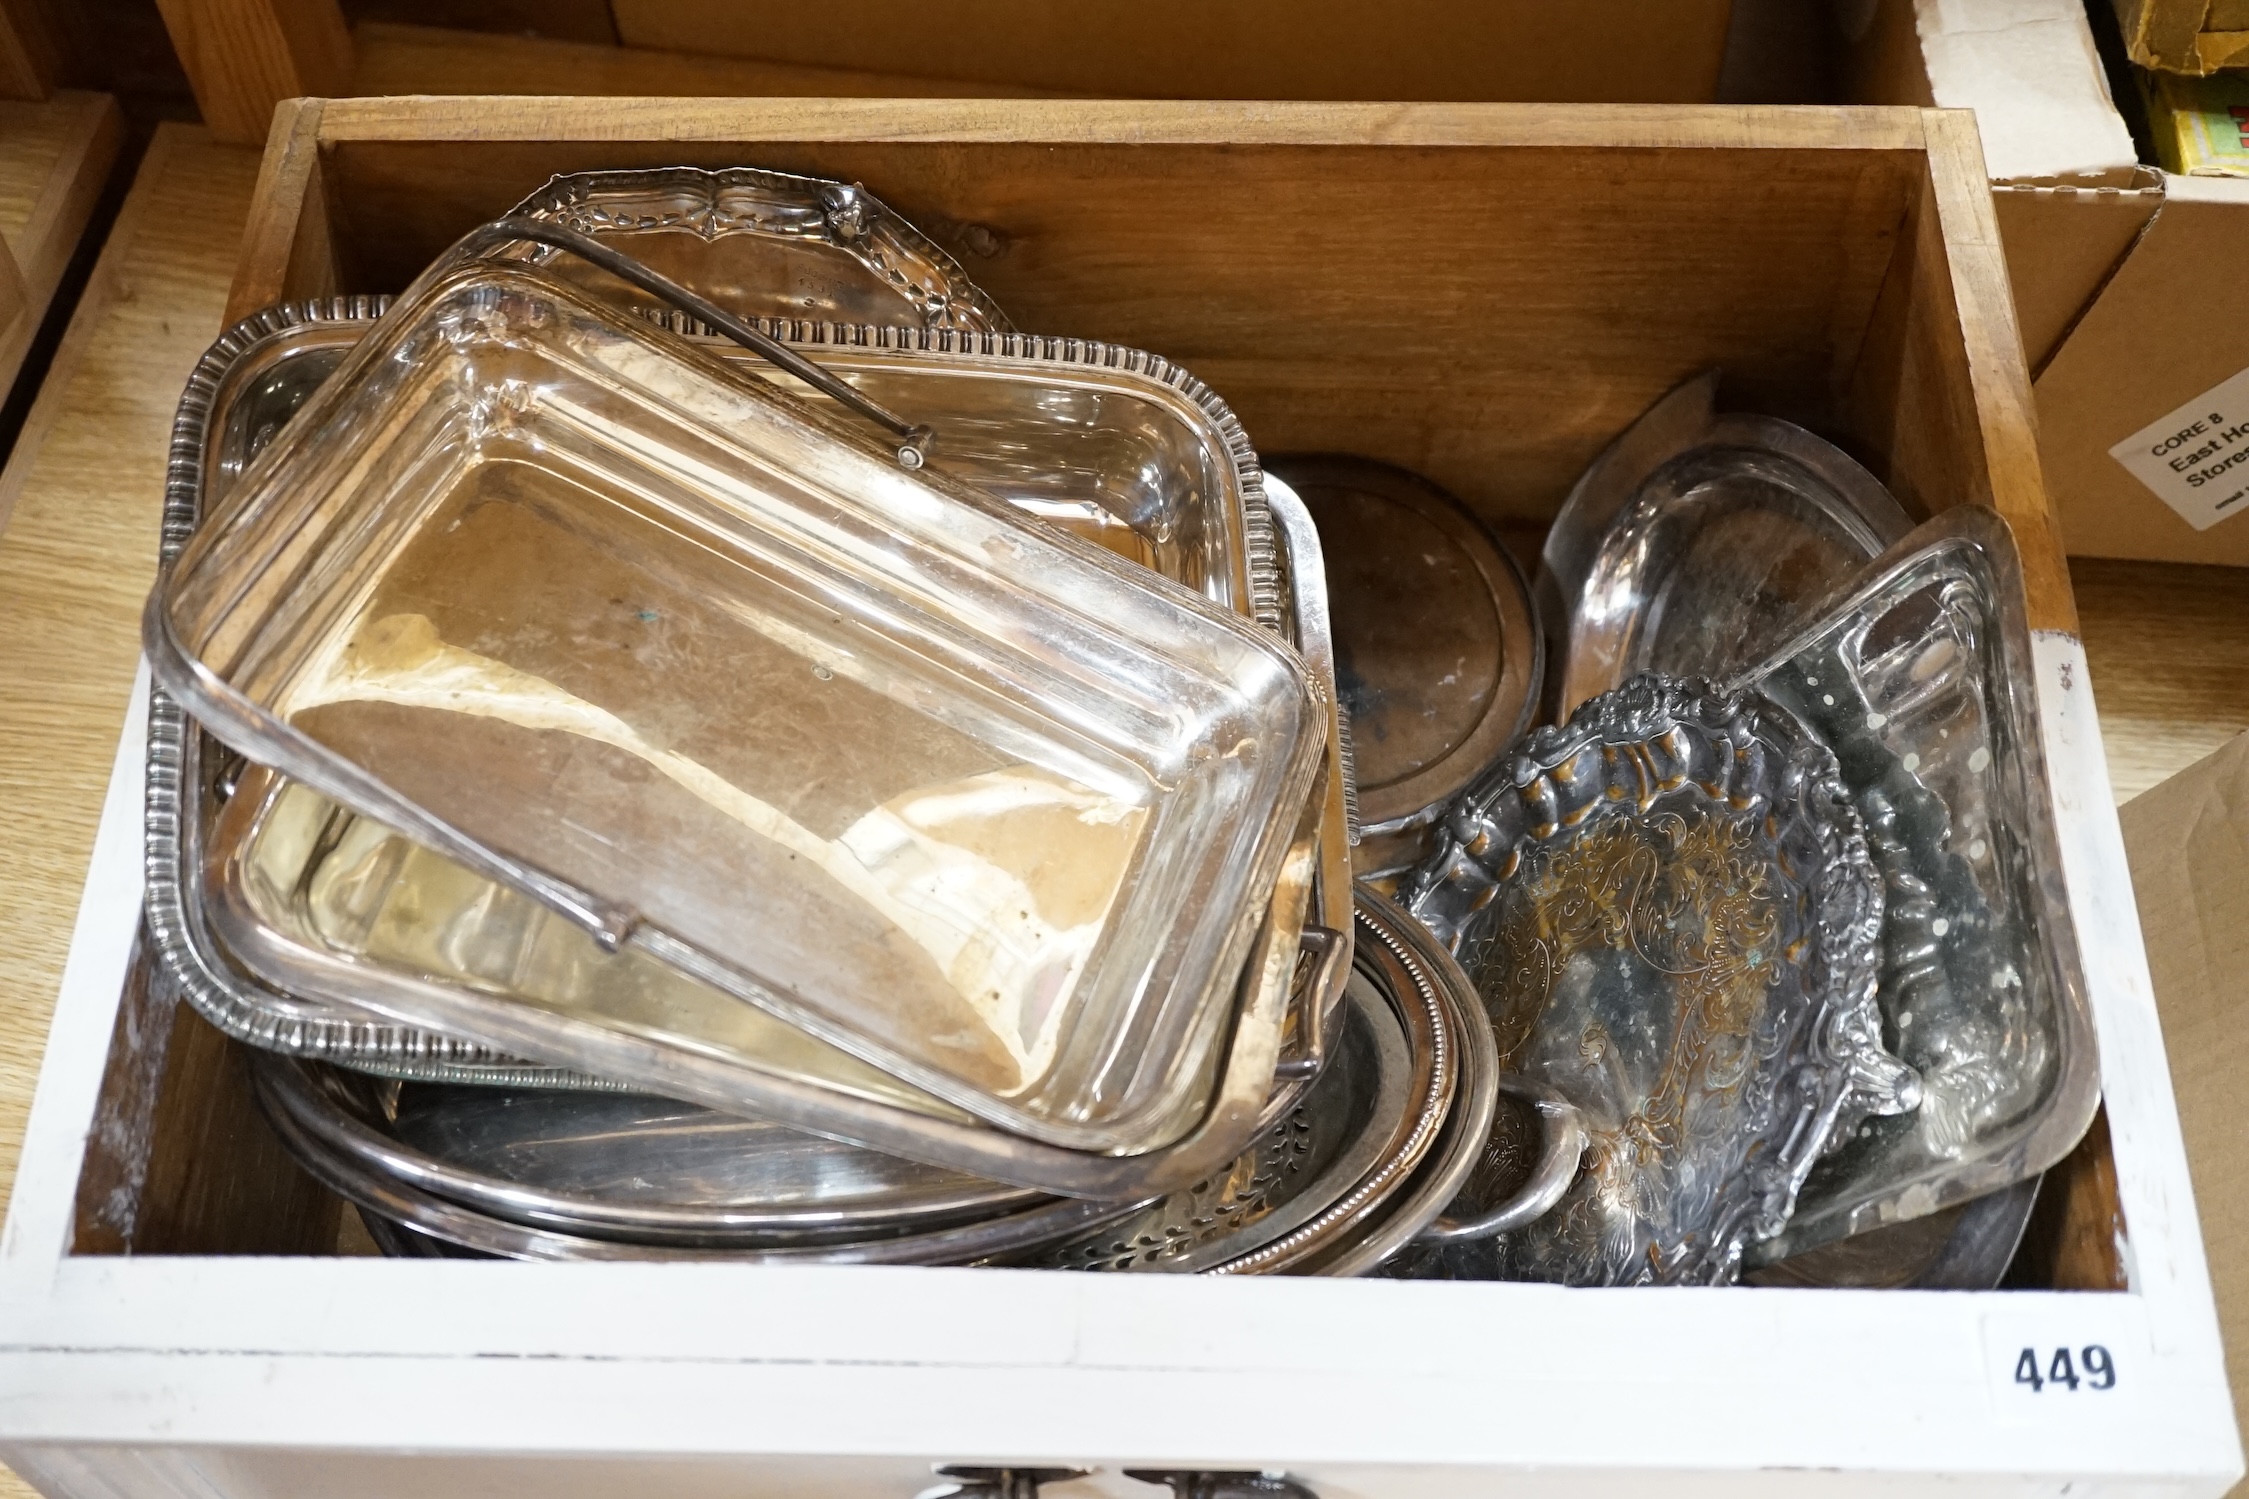 A quantity of silver plate to include cutlery, dishes, wine coaster, etc. Condition - varies, poor to fair